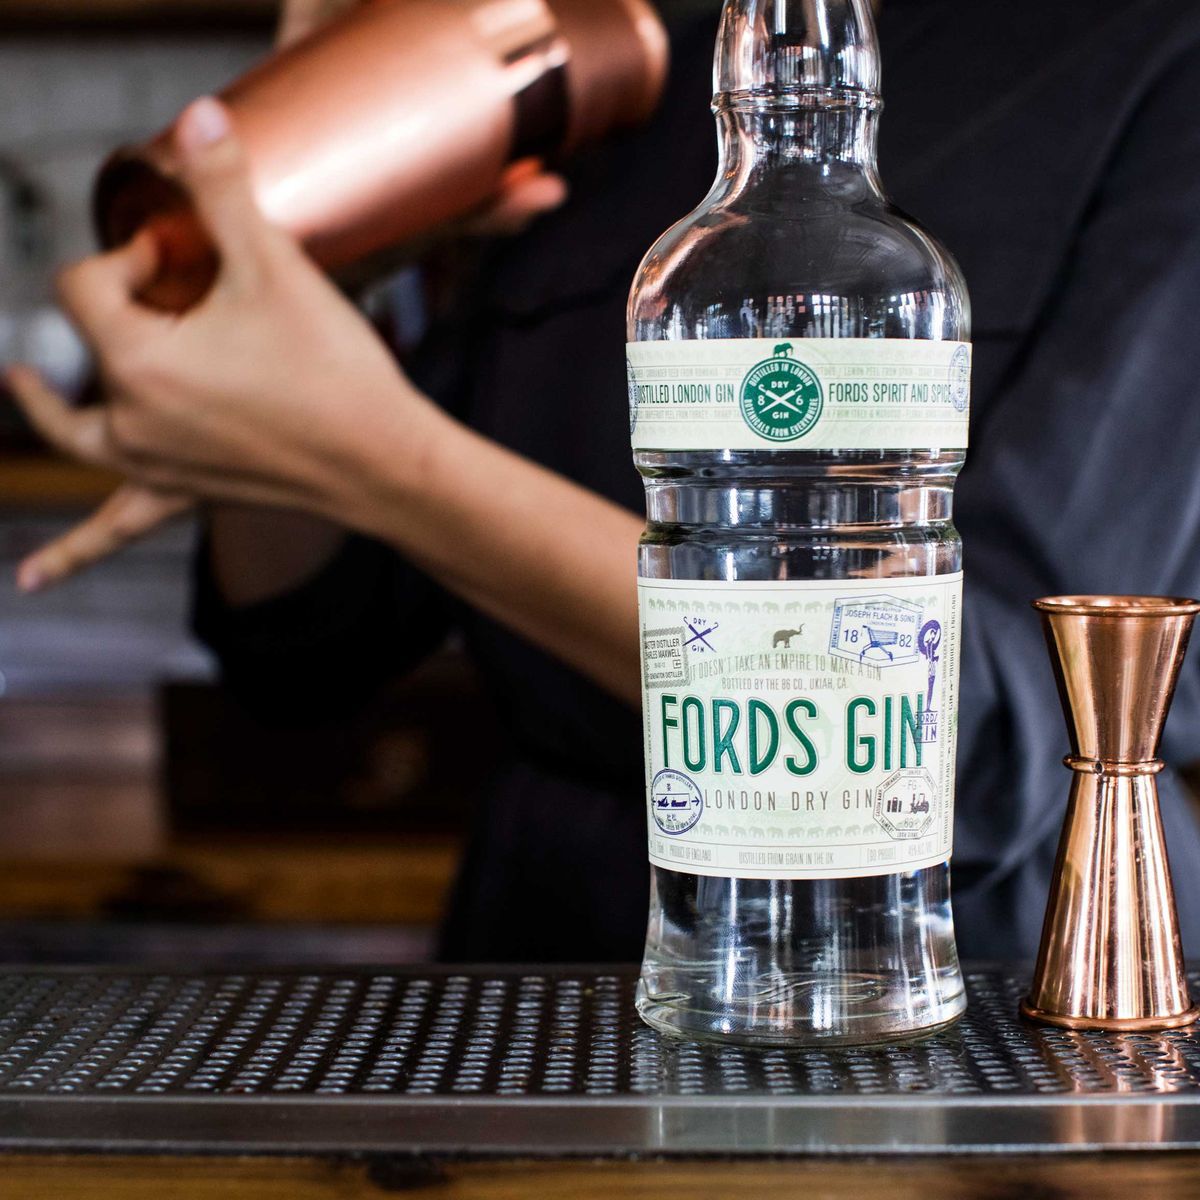 Fords Gin is a collaboration between 8th generation Master Distiller Charles Maxwell of Thames Distillers and Simon Ford, dedicated to creating spirits designed in unison with professional bartenders and celebrated distillers from around the world.

A thoughtful mix of nine botanicals, Fords Gin starts with a traditional base of juniper & coriander seed balanced by citrus, florals and spices. Steeped for 15 hours before distillation, the botanicals deliver an aromatic, fresh and floral spirit with elegant notes of jasmine and grapefruit that creates a versatile base for any gin-inspired cocktail.